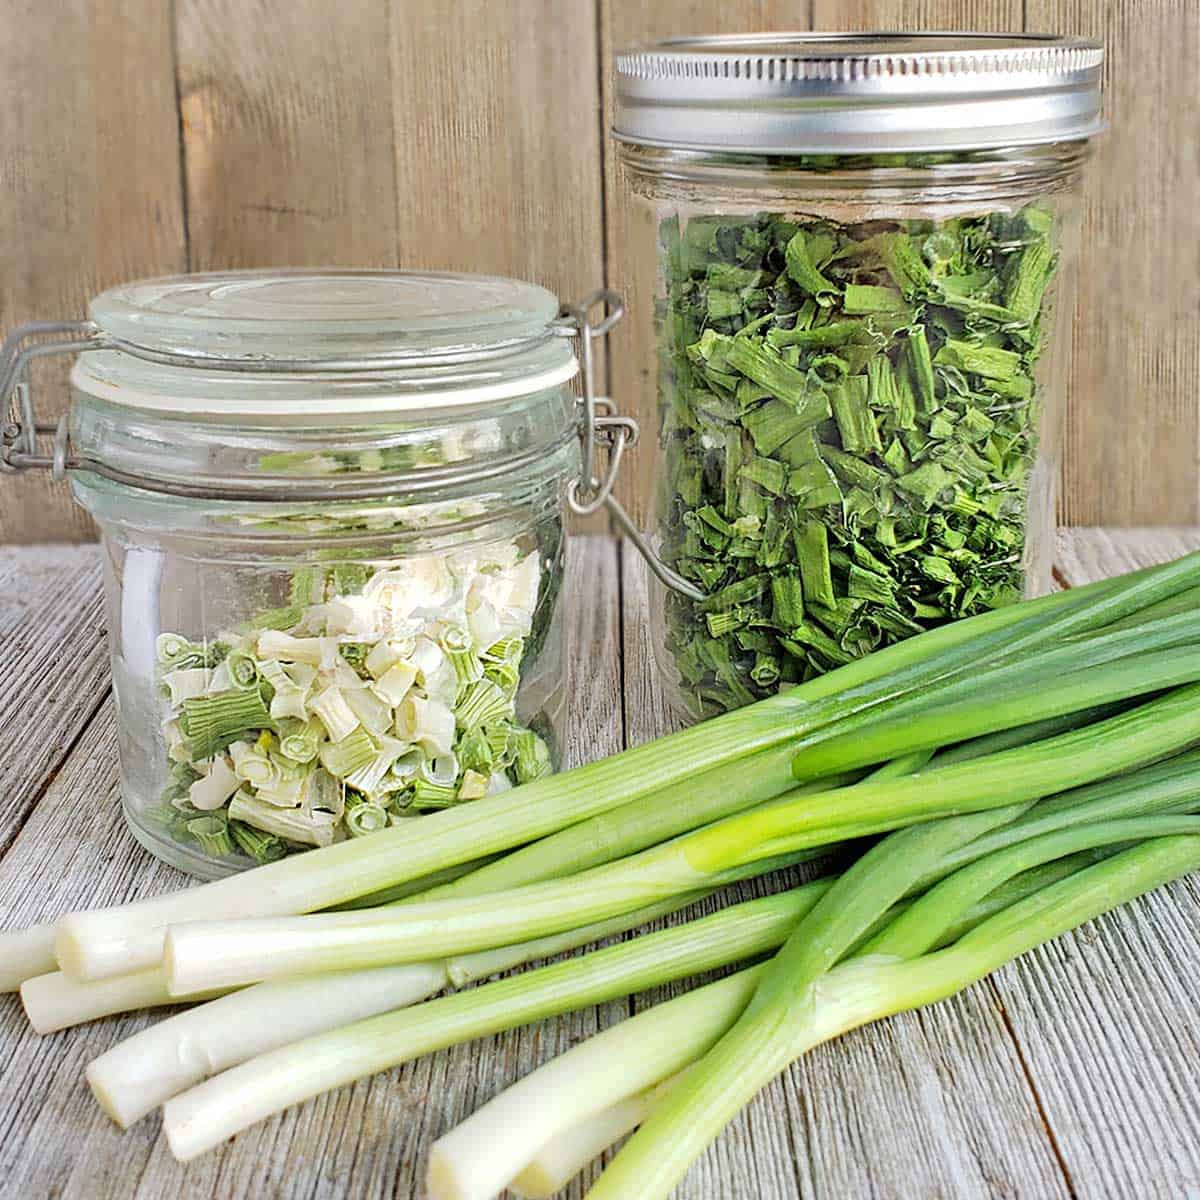 How to Cut Green Onions - The Quick Journey